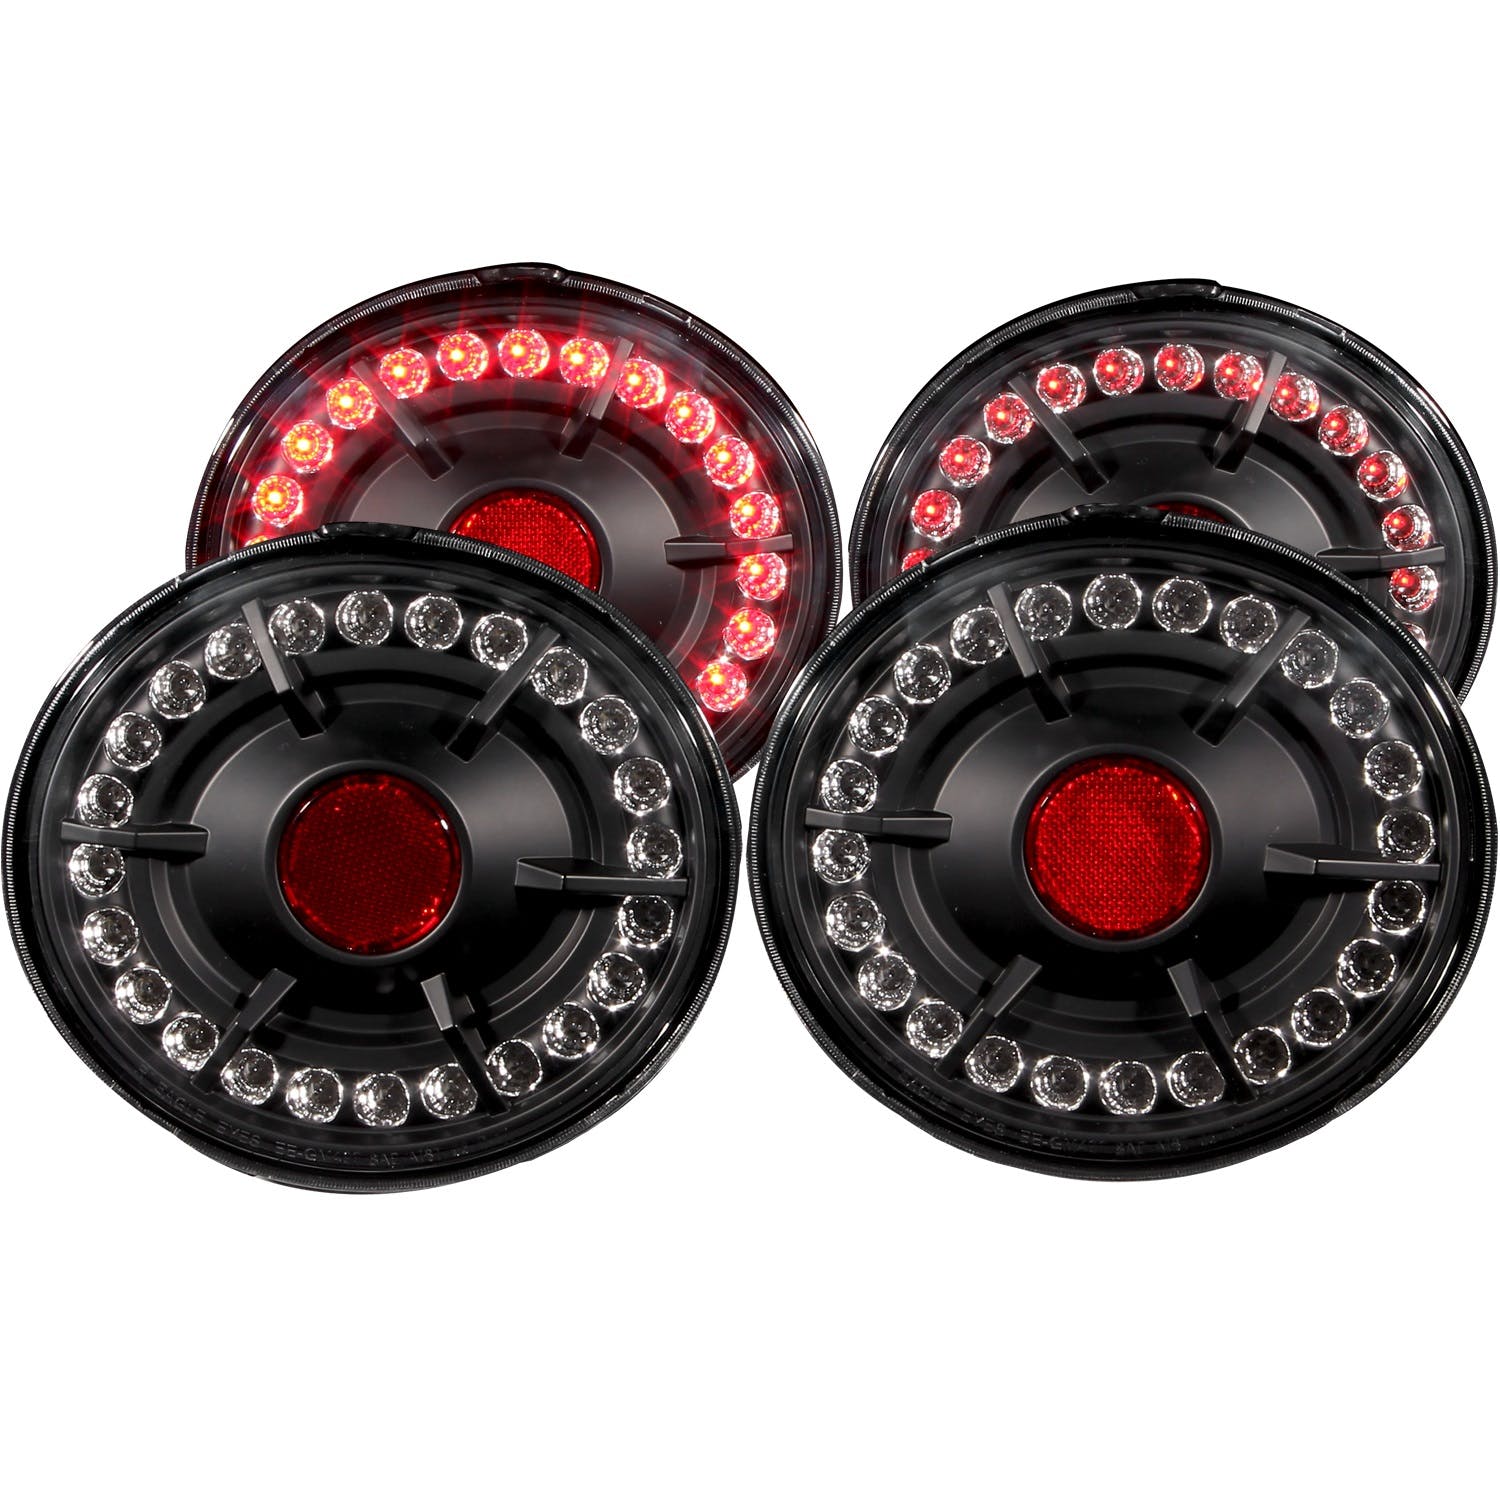 AnzoUSA 321169 LED Taillights Black 4pc